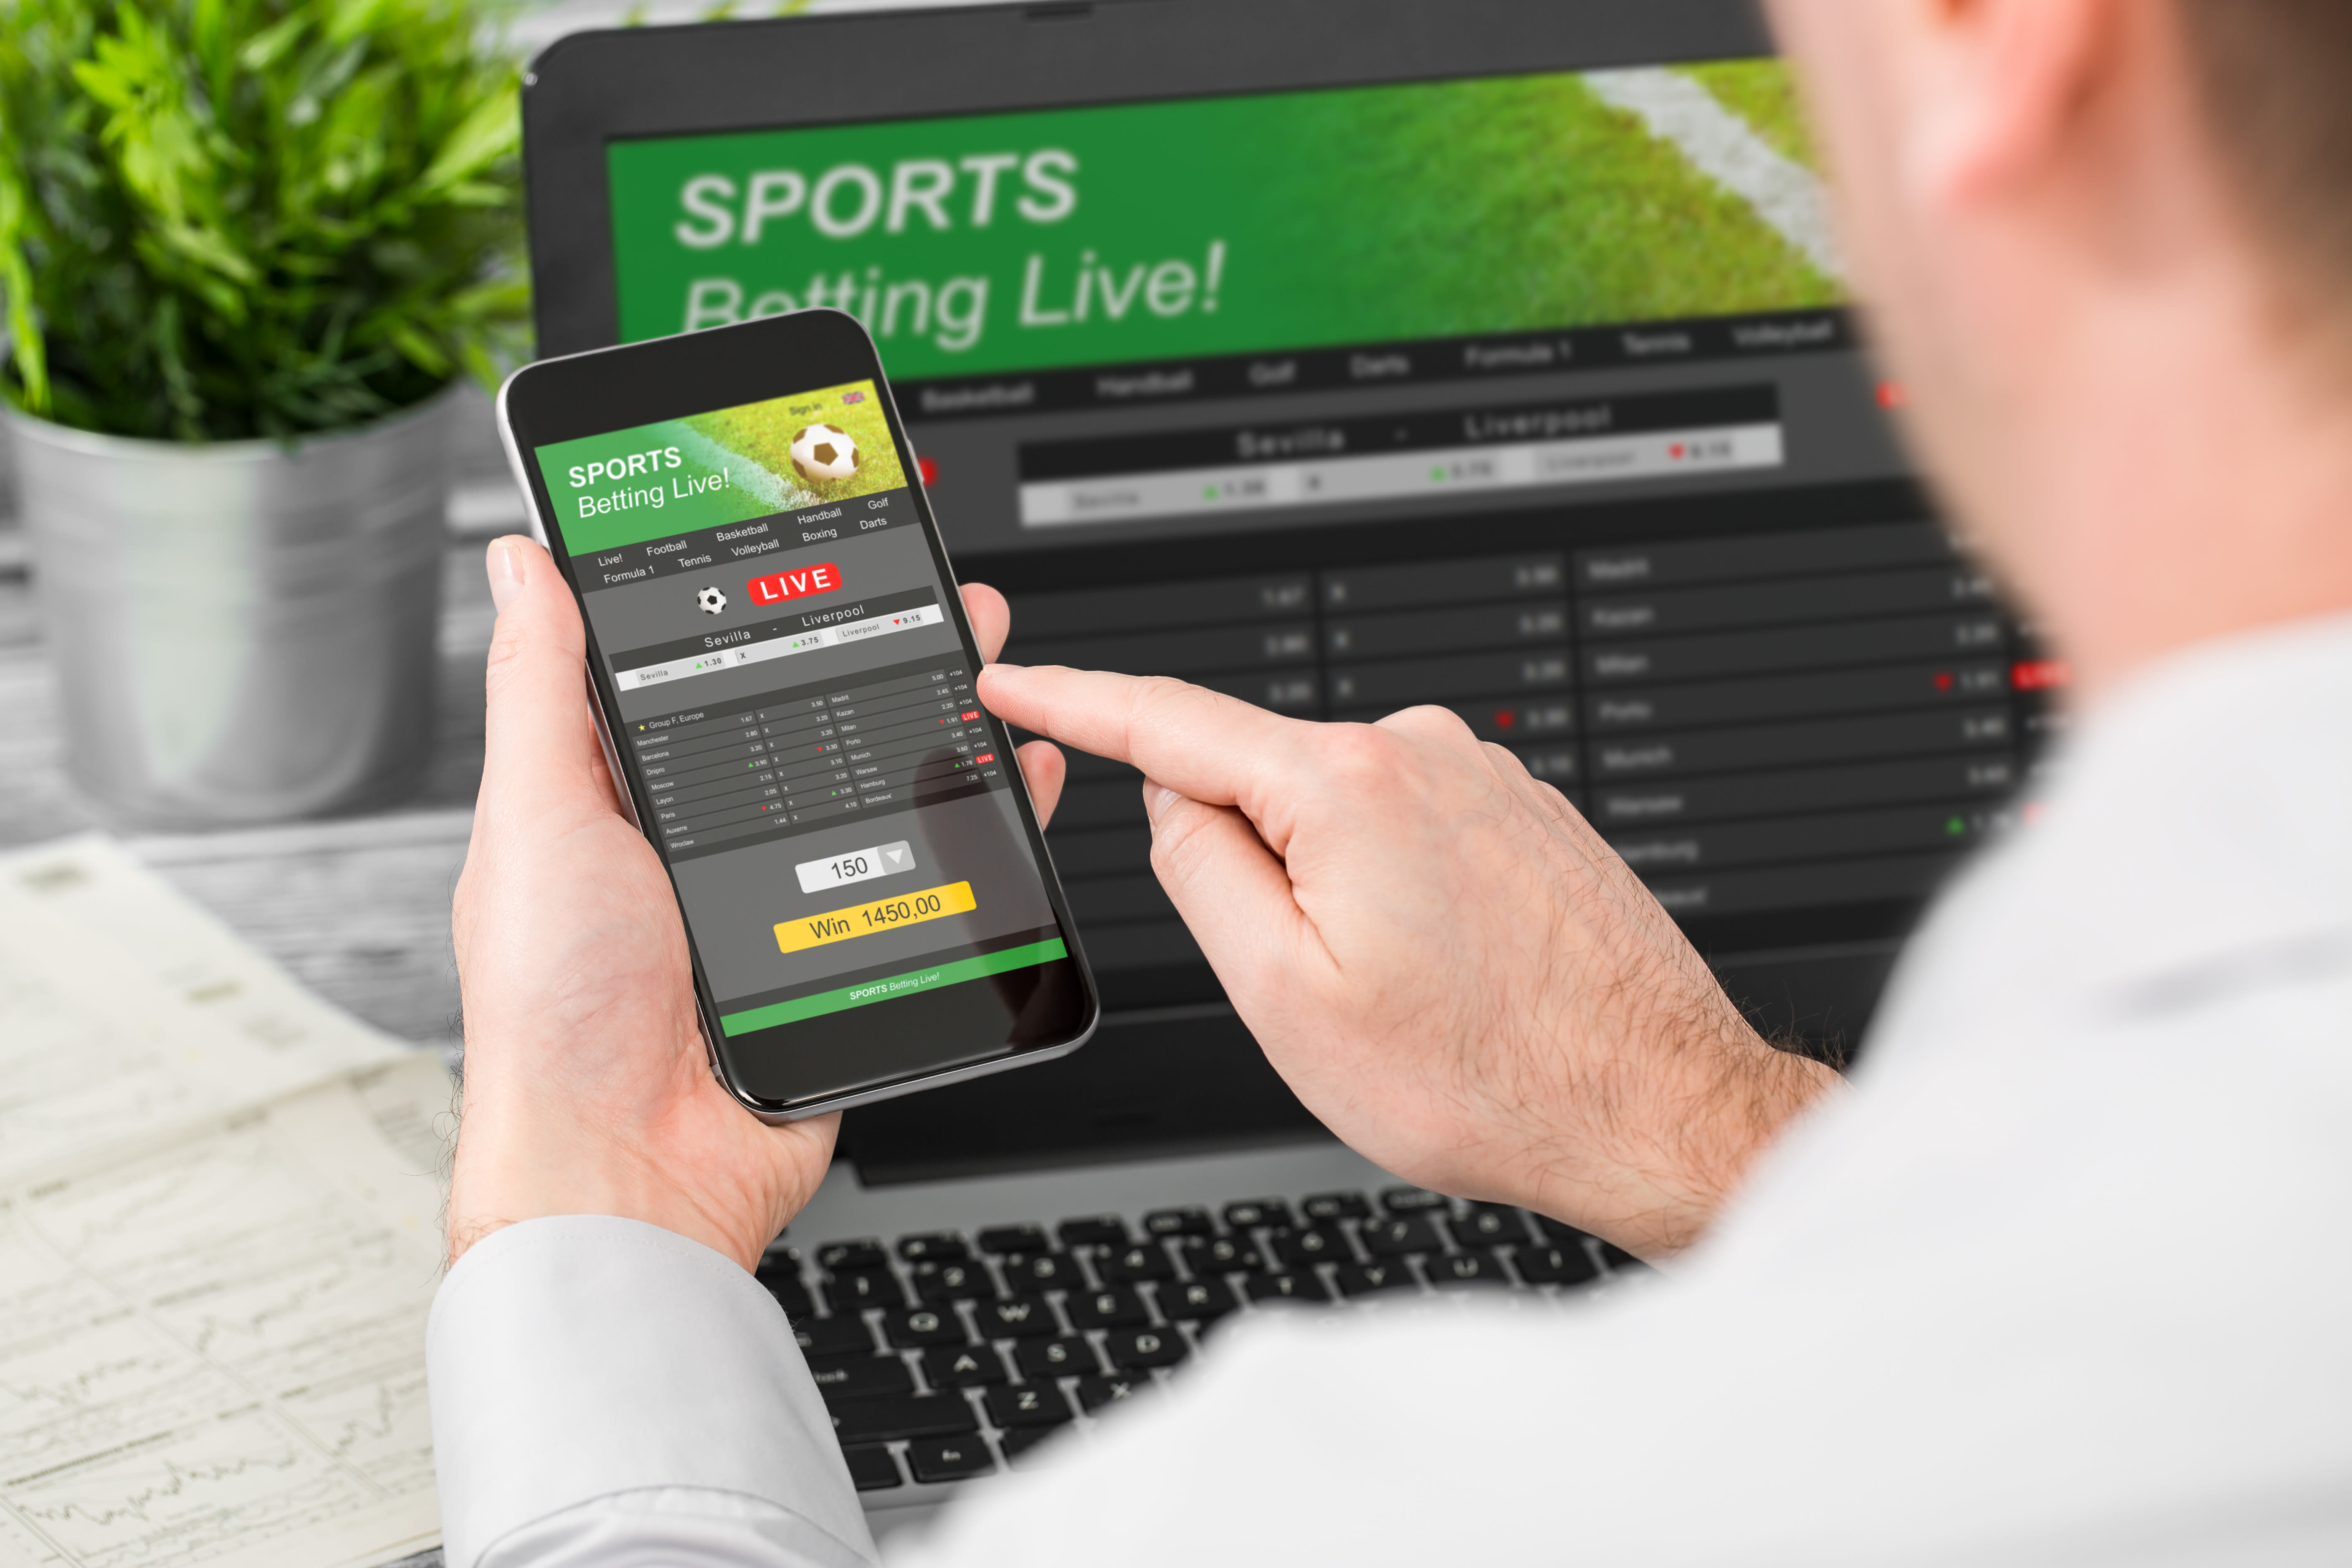 Could Investing $100,000 in DraftKings Stock Make You a Millionaire?